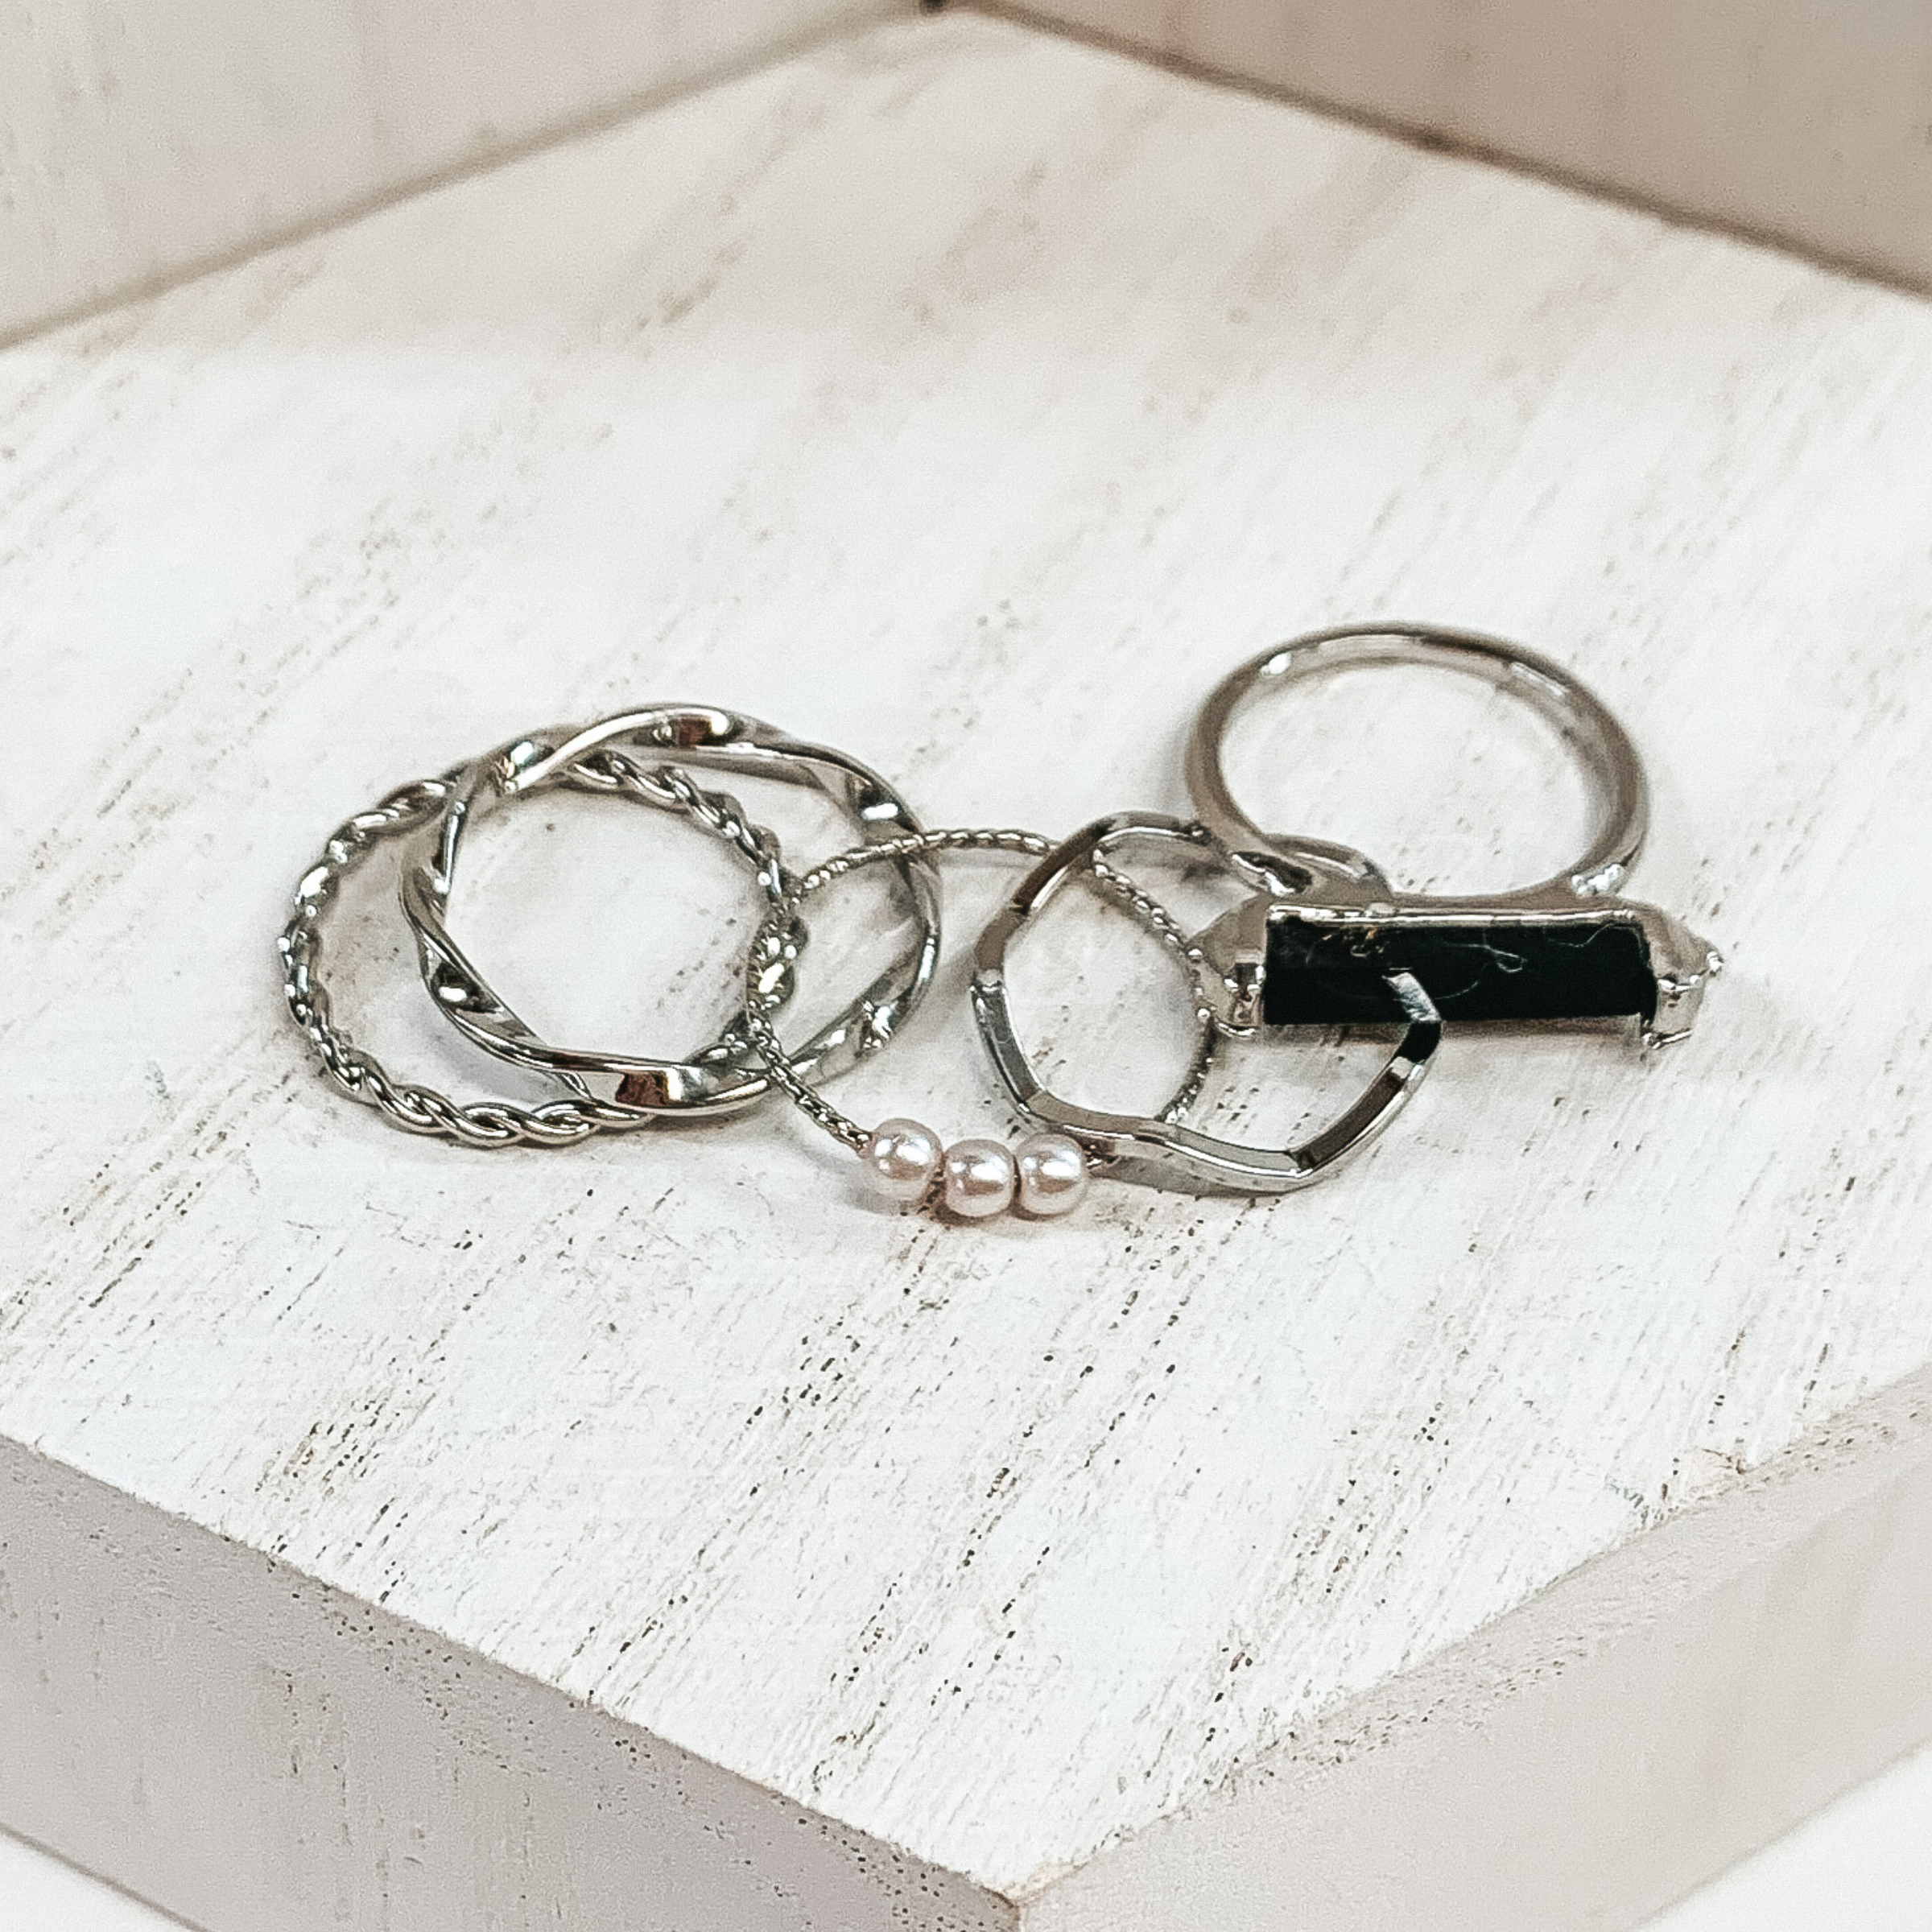 This is a set of five silver rings. You have two twisted rings, one wavy ring, on ring that has 3 pearls, and the last ring has a black bar stone. These rings are pictured on a white background. 